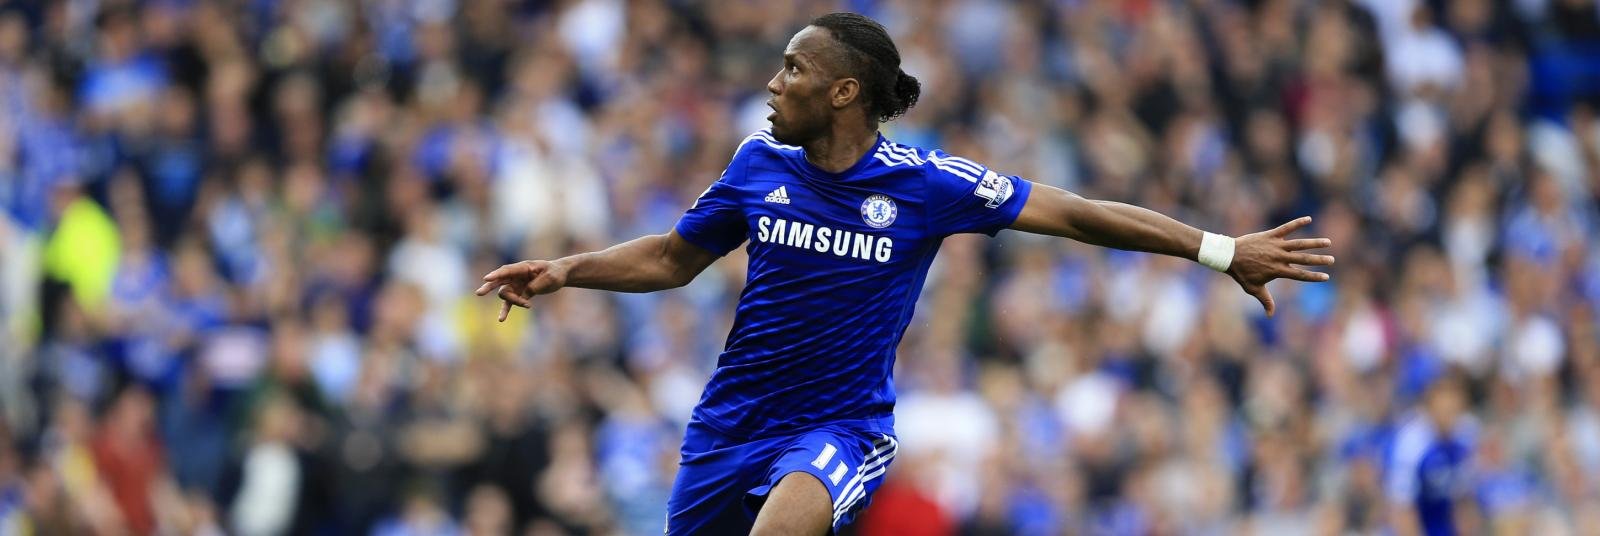 38-year-old Chelsea legend lined up for European loan move